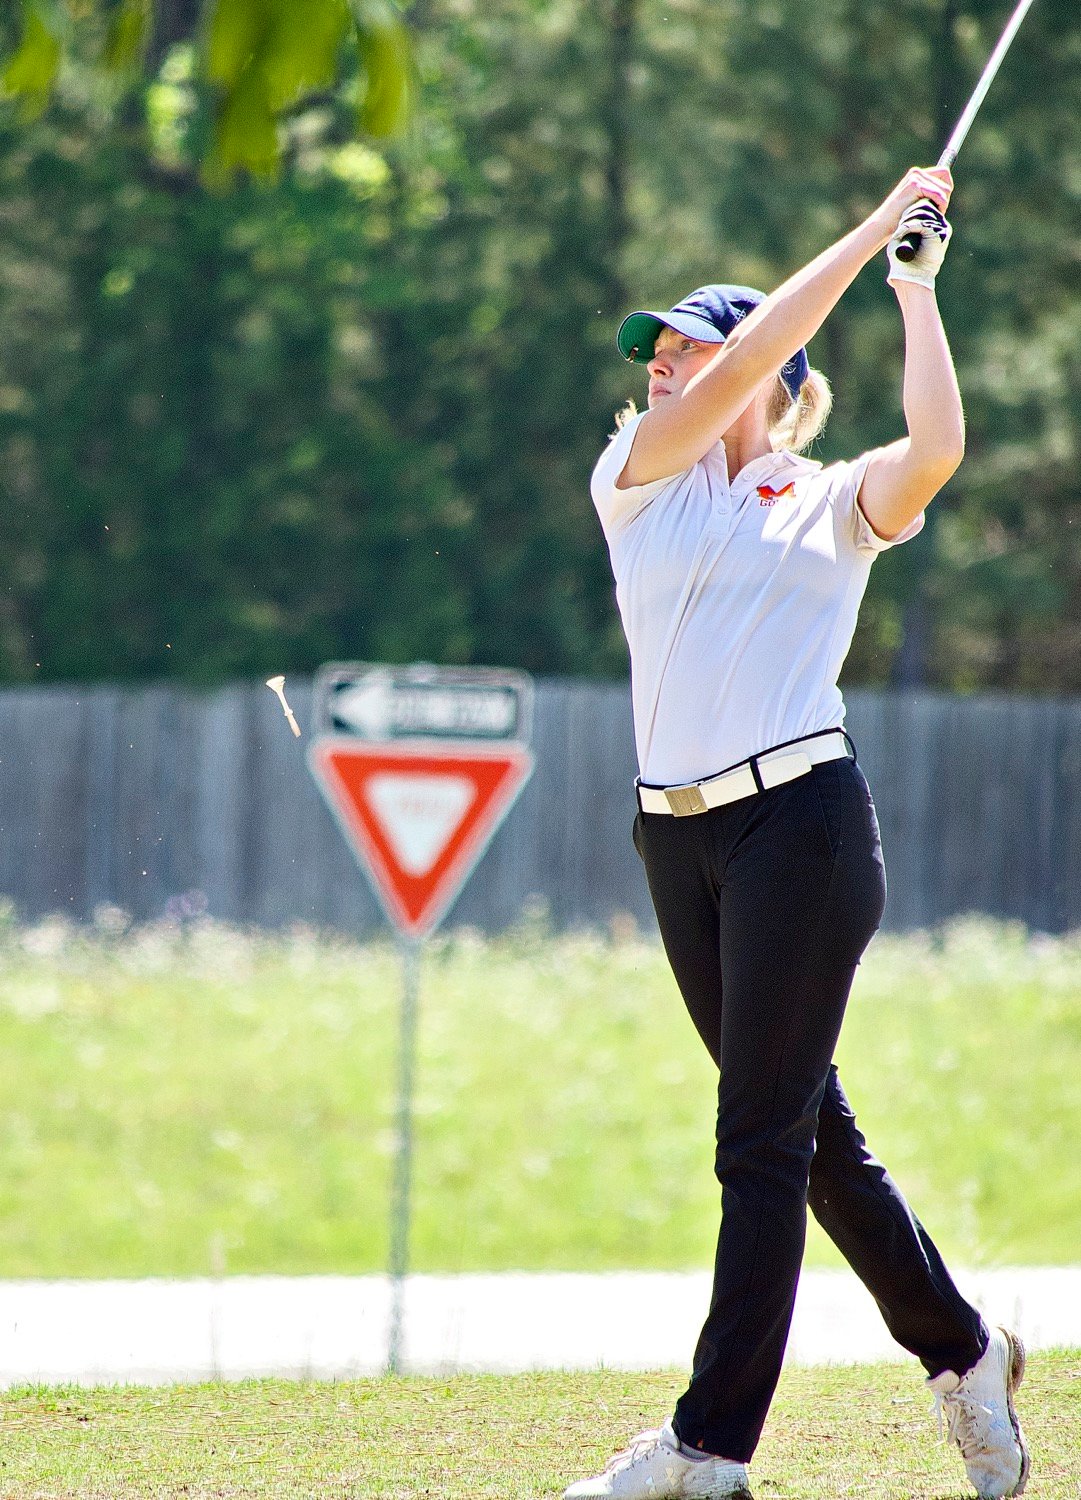 Ava Johnson drives the ball way down the 13th hole, leaving a short second to card an easy par on her way to an opening 88 on Monday. [see more shots]